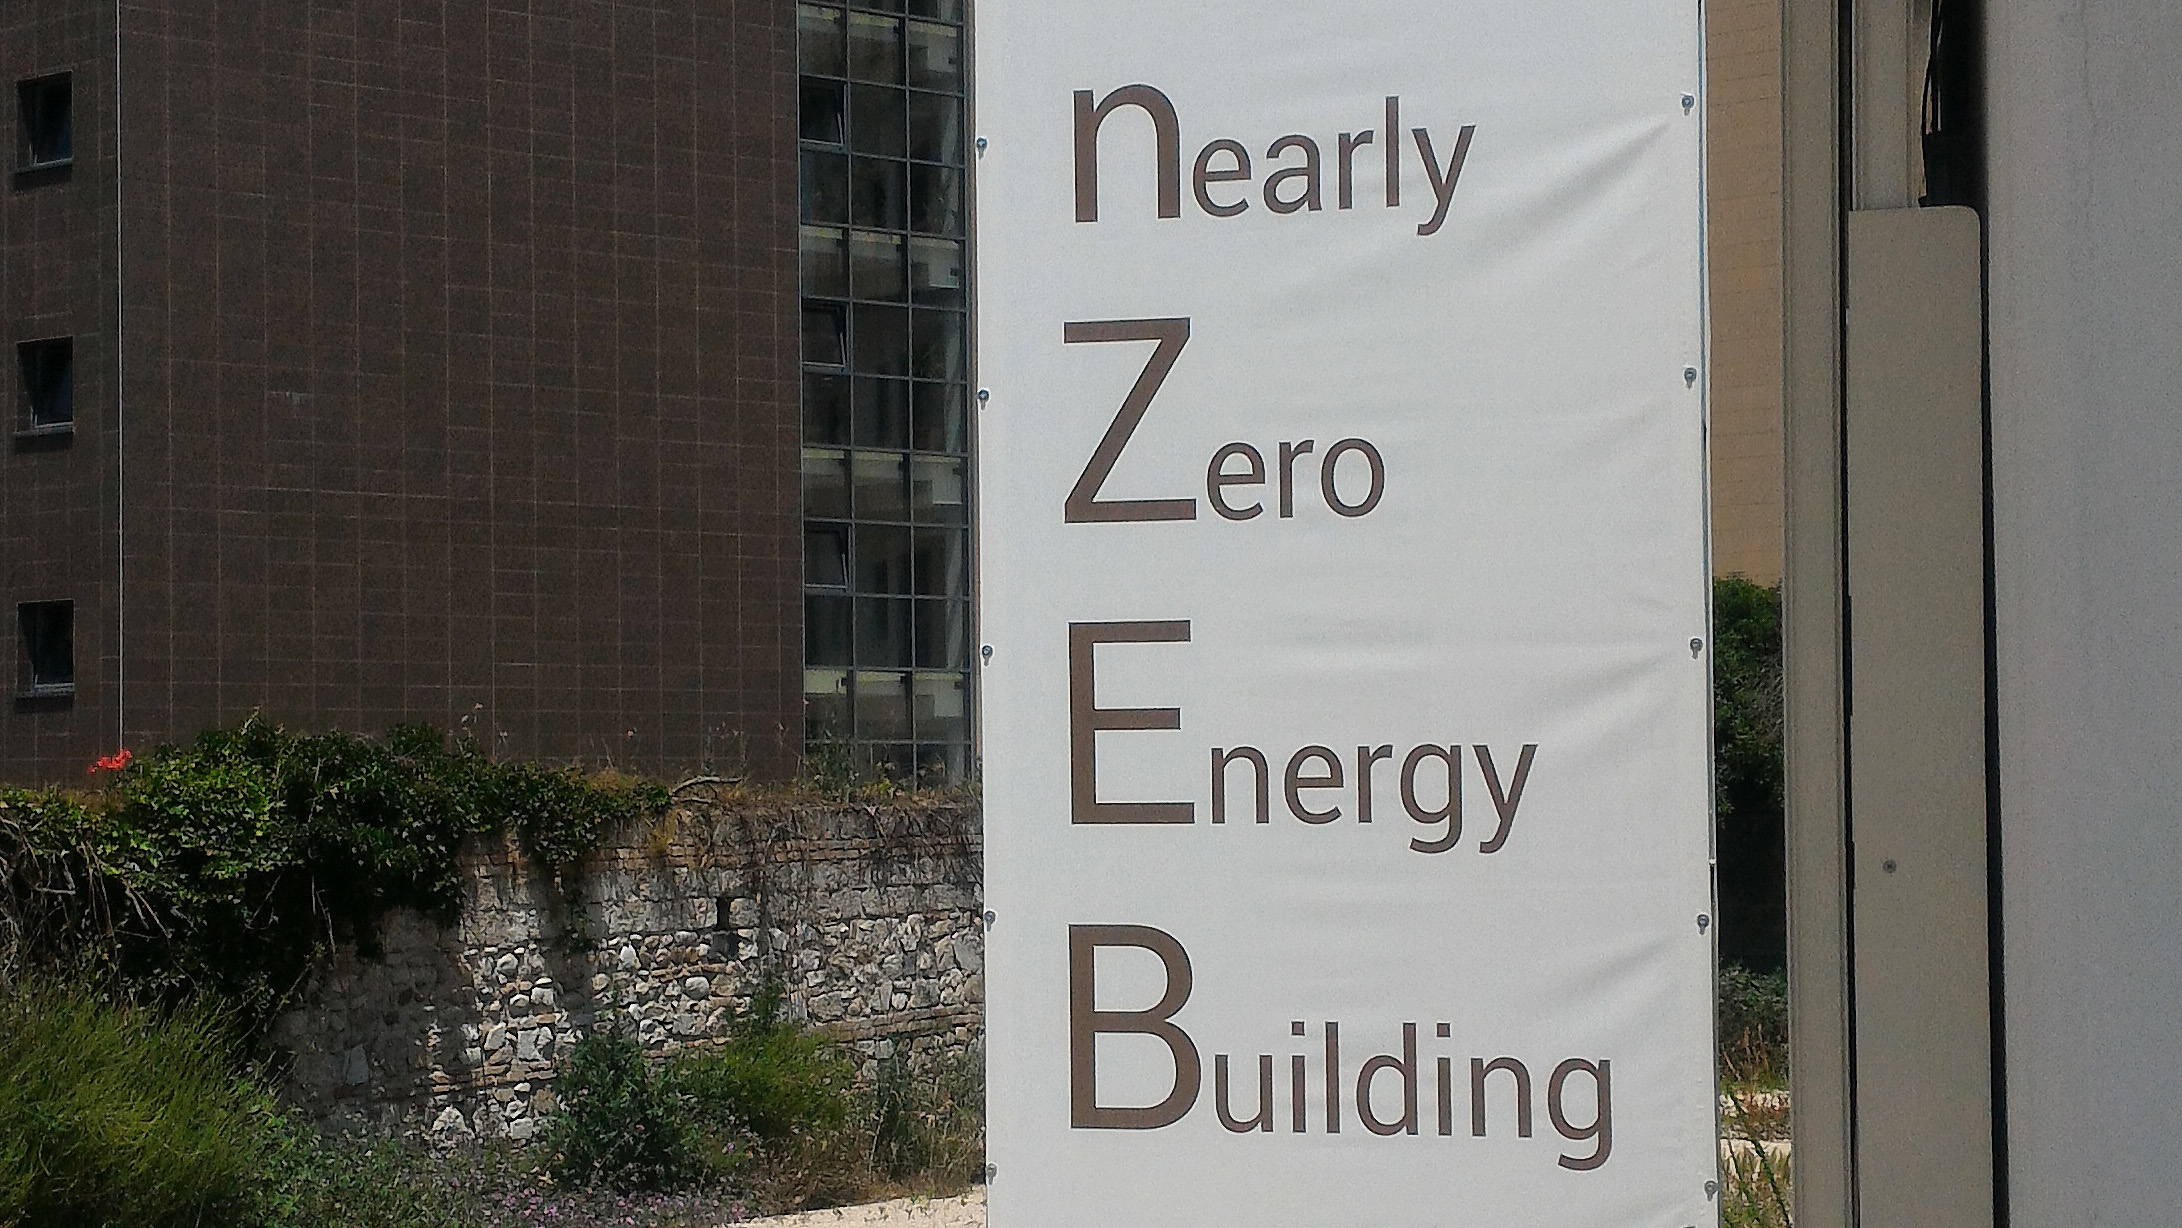 How much do you know about NZEBs?